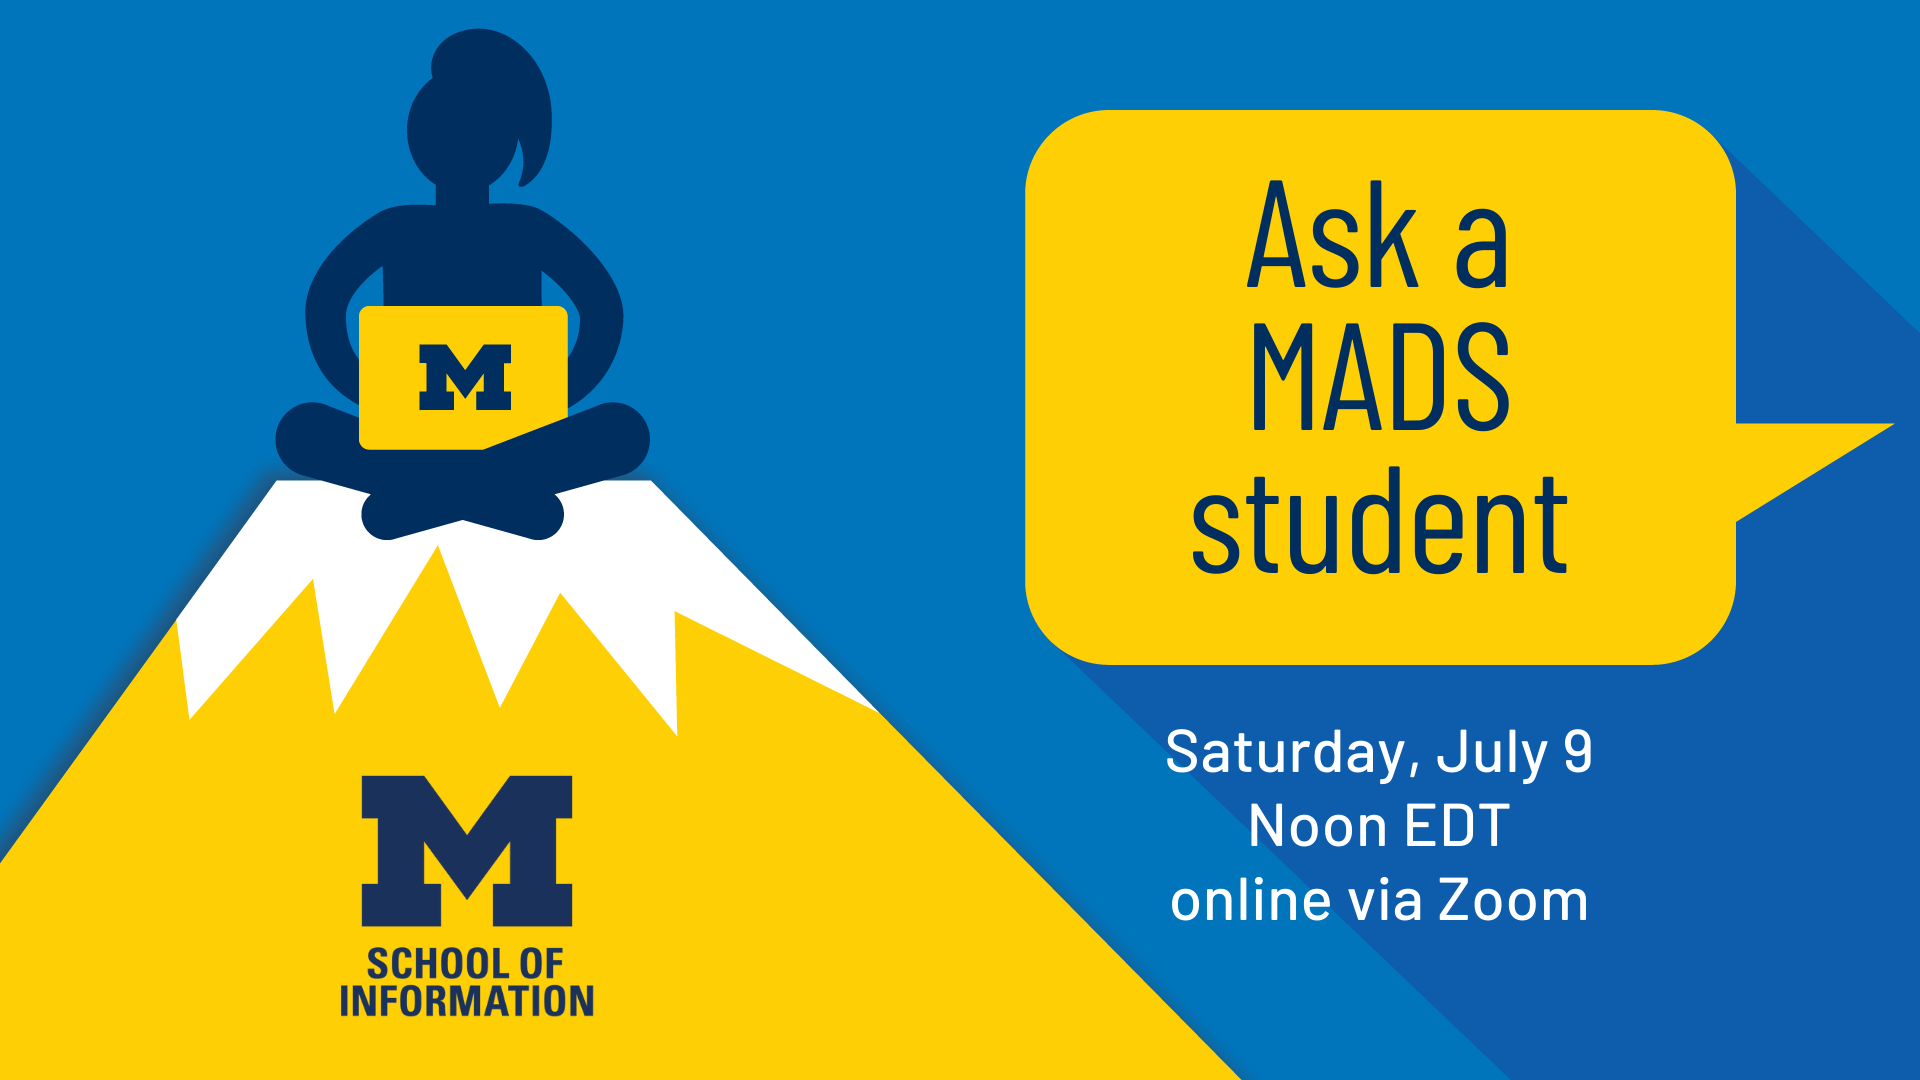 “Ask a MADS student. Saturday, July 9. Noon EDT. Online via Zoom.”